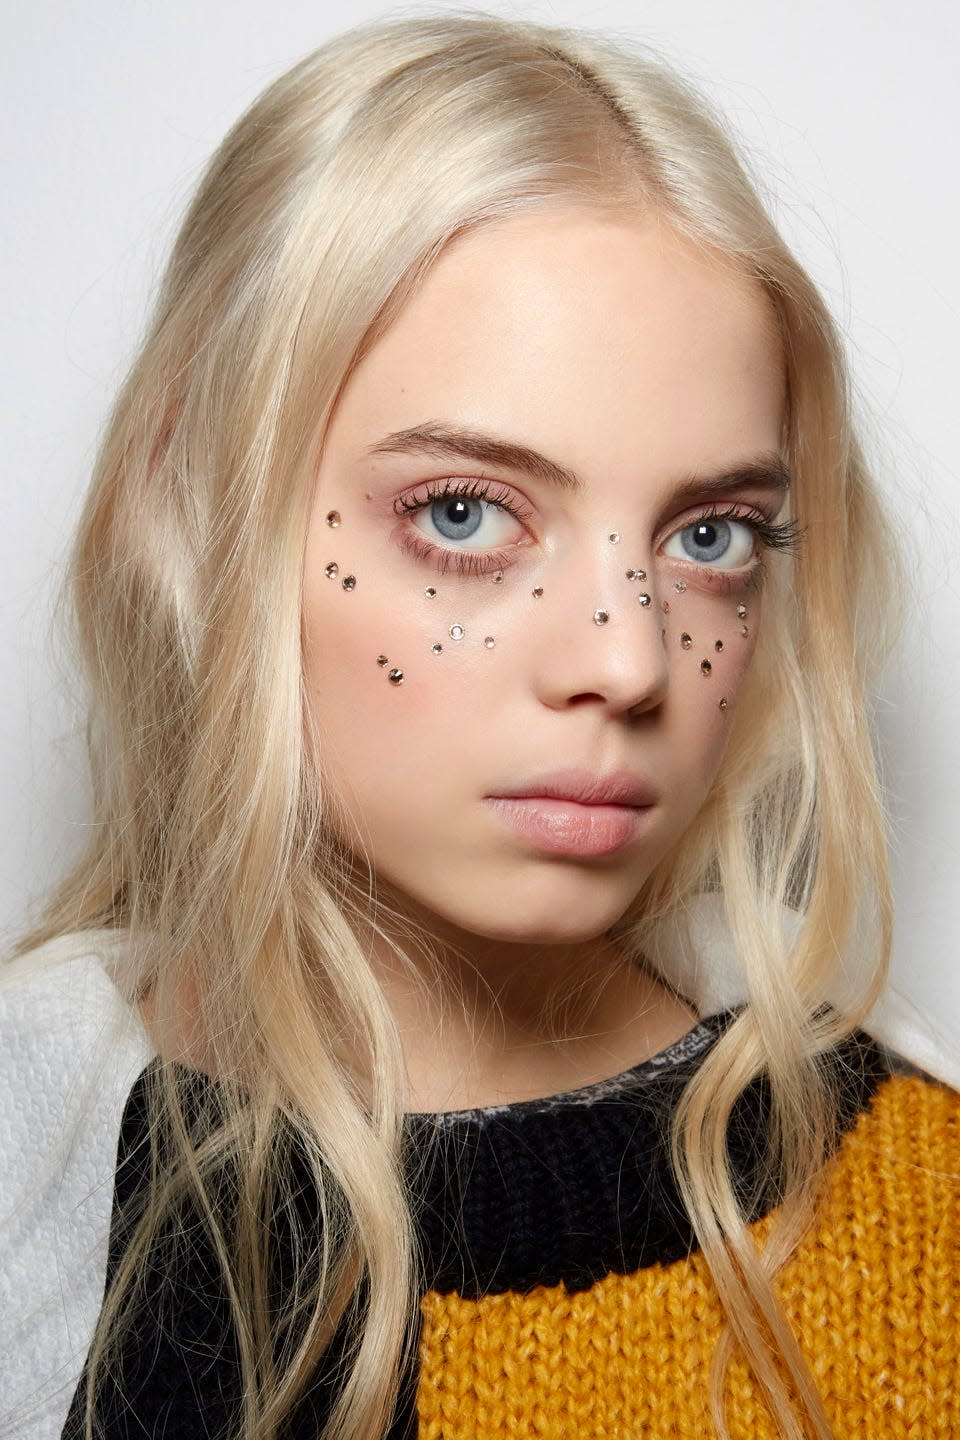 <p>Forget freckles, a scattering of rhinestones across your nose says 'Met Gala but make it cute'.</p>